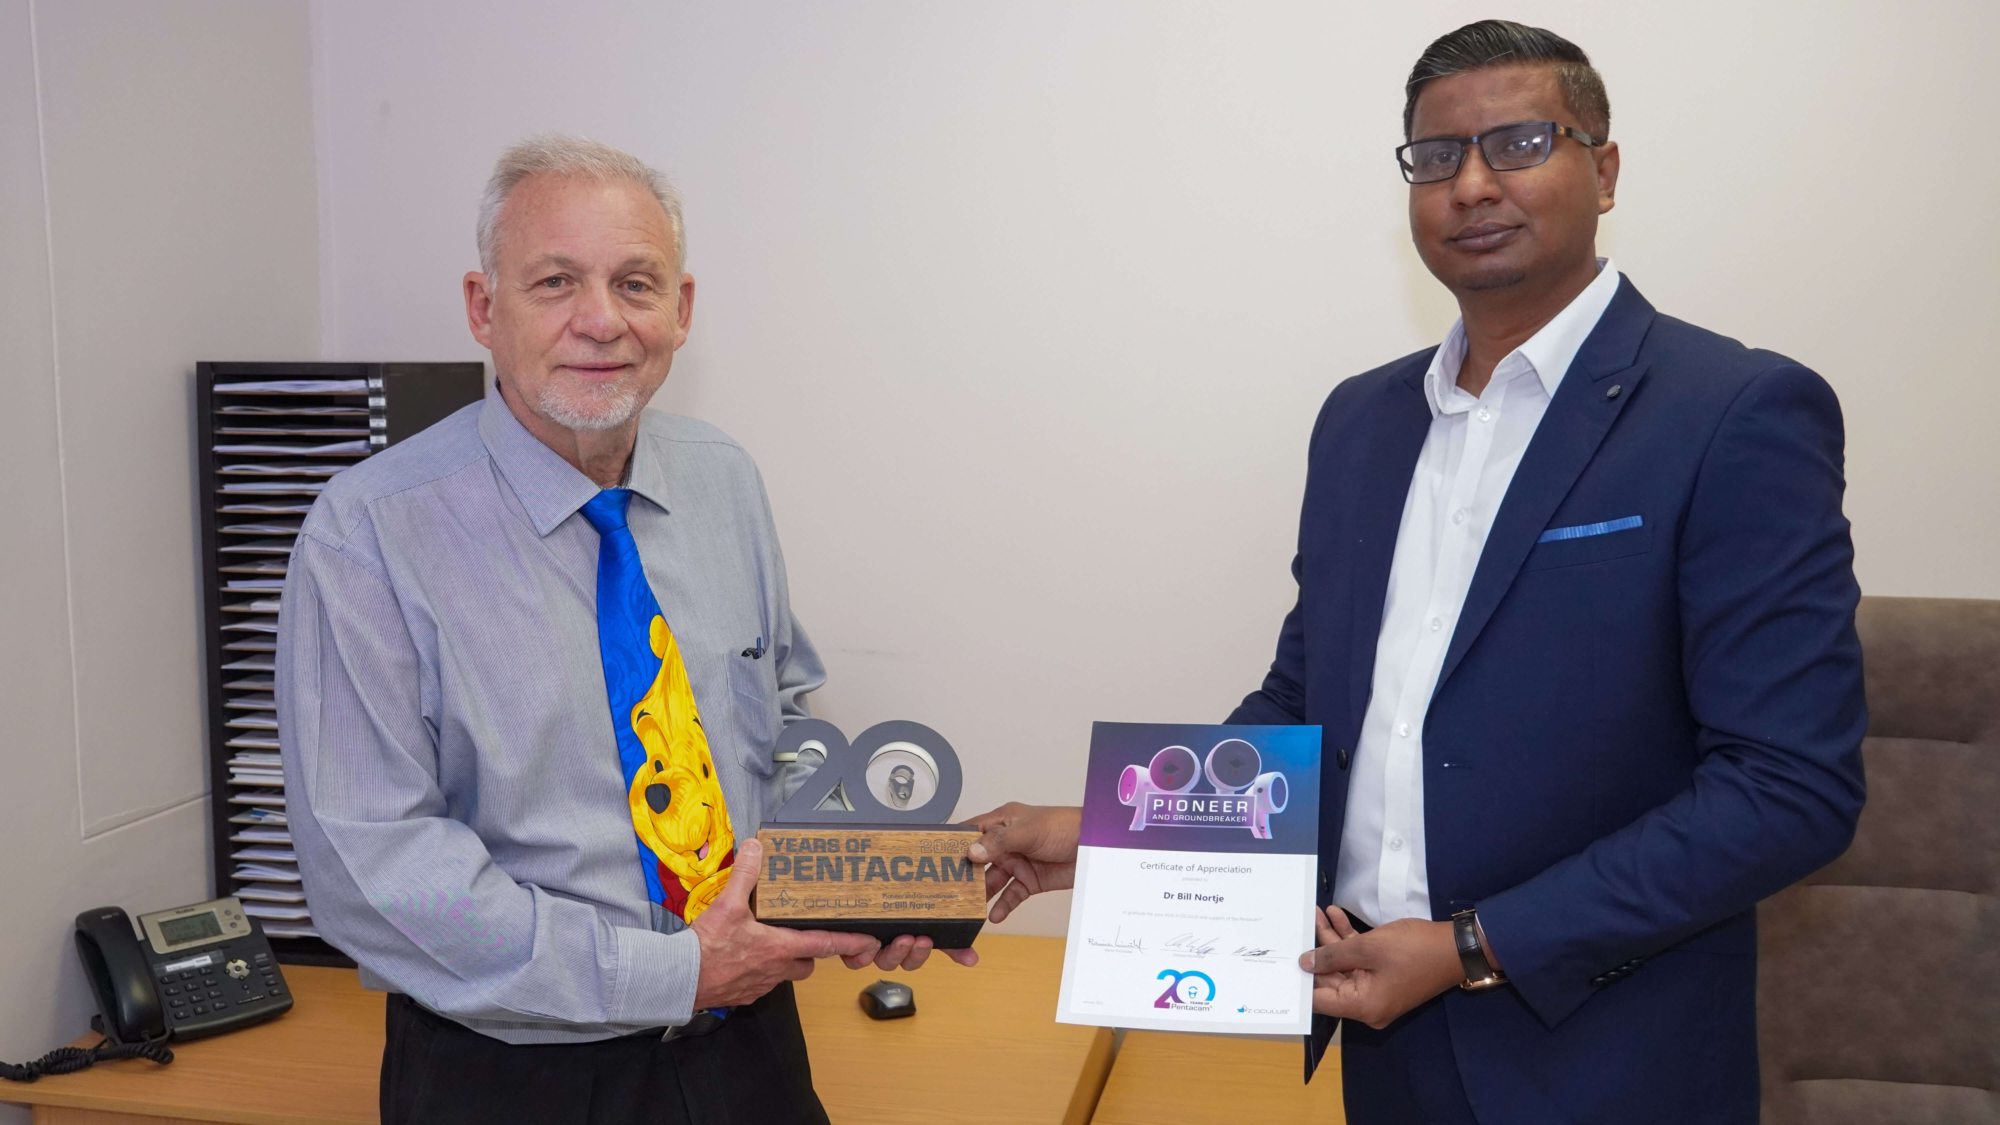 Dr Bill Nortje and Mr Neil Sivalingum, Senior Biomedical Engineer at Genop Healthcare (Pty) Ltd., holding the 20th Anniversary Pentacam® Trophy and Certificate of Appreciation.